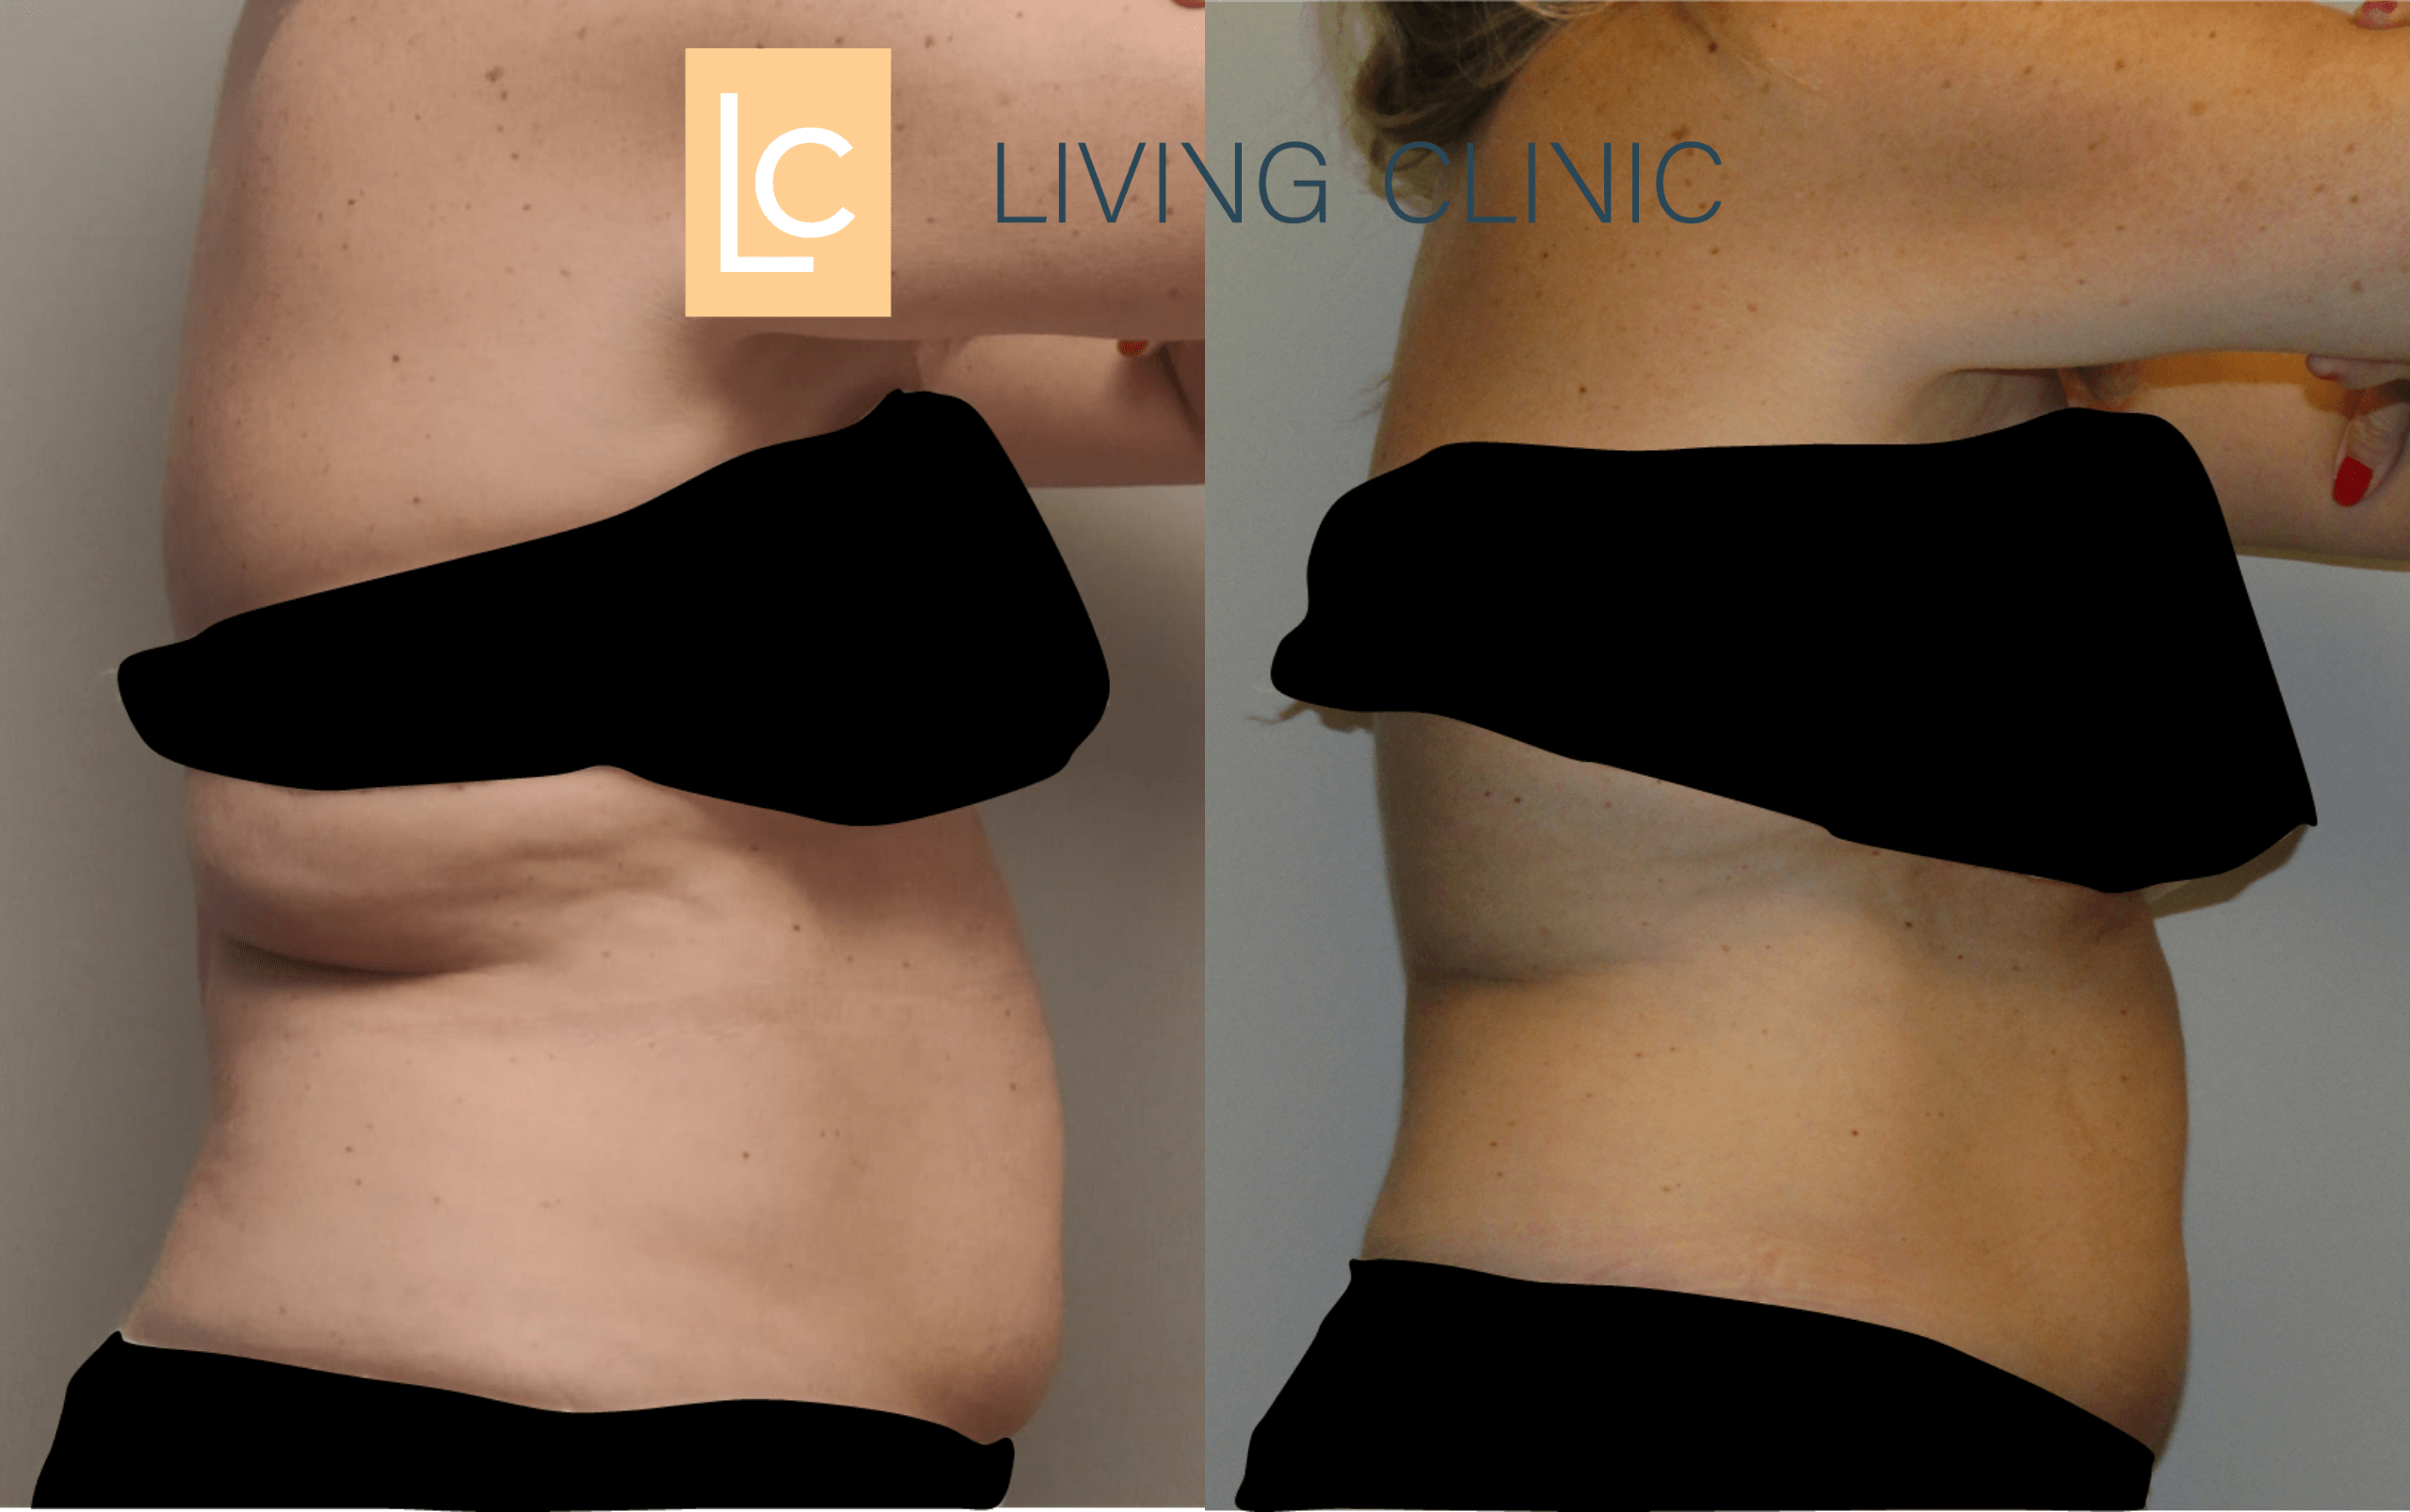 EMSculpt NEO and Coolsculpting combined results